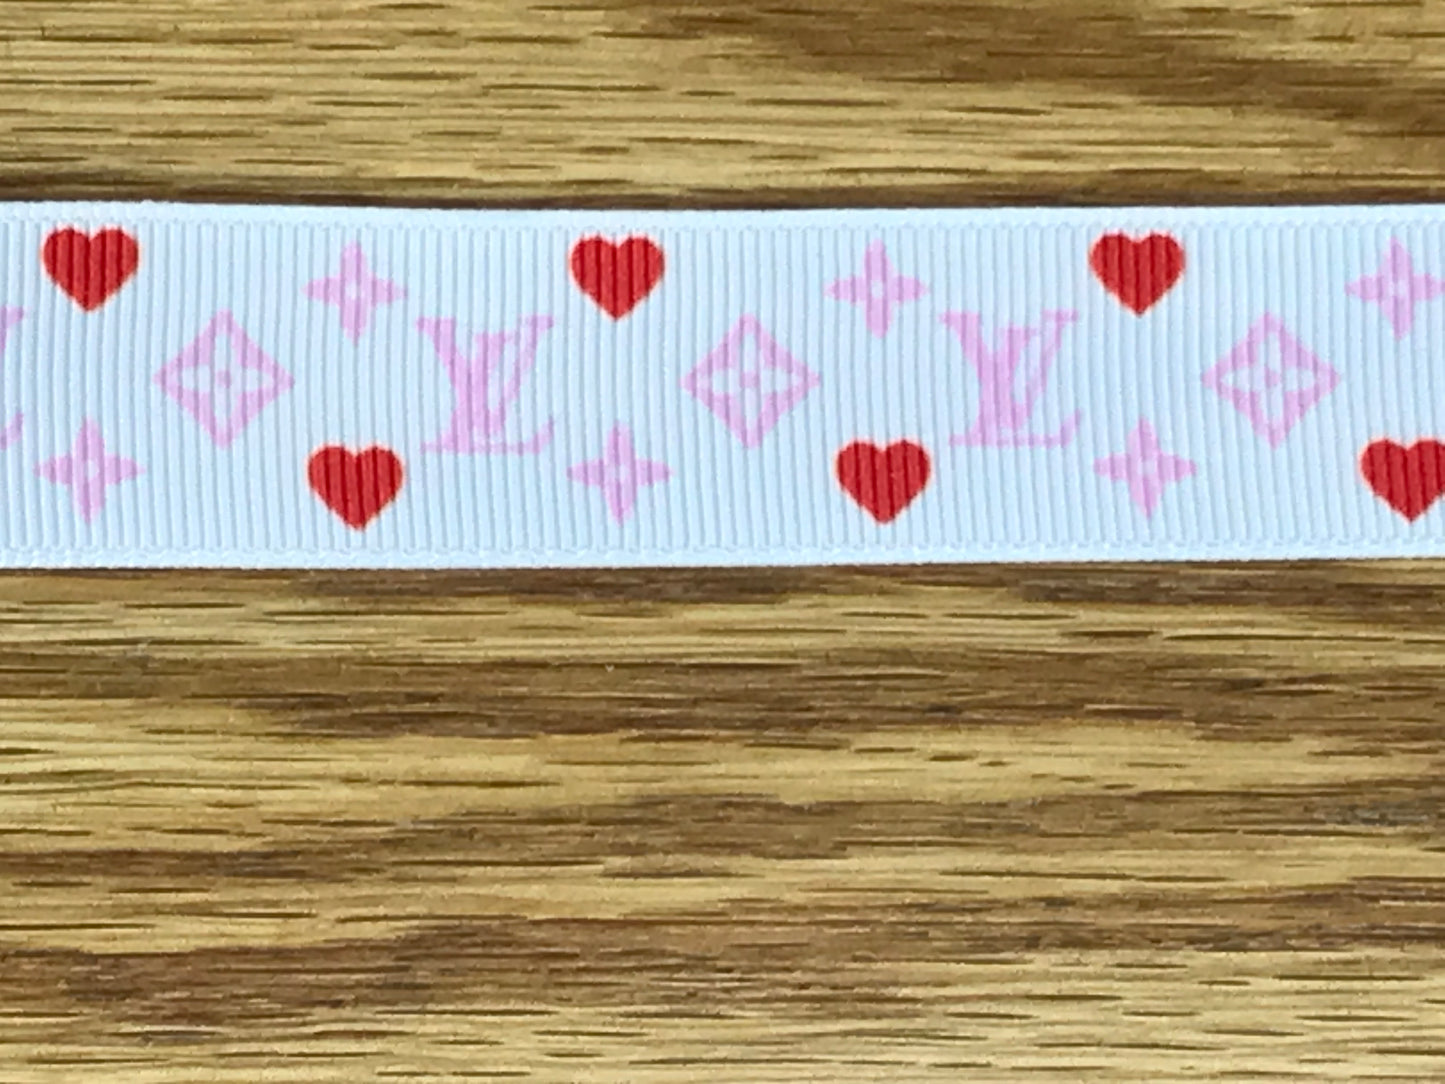 7/8" Wide Famous Designer LV Louis Vuitton Logo With Hearts Valentine's Day Love Grosgrain Ribbon